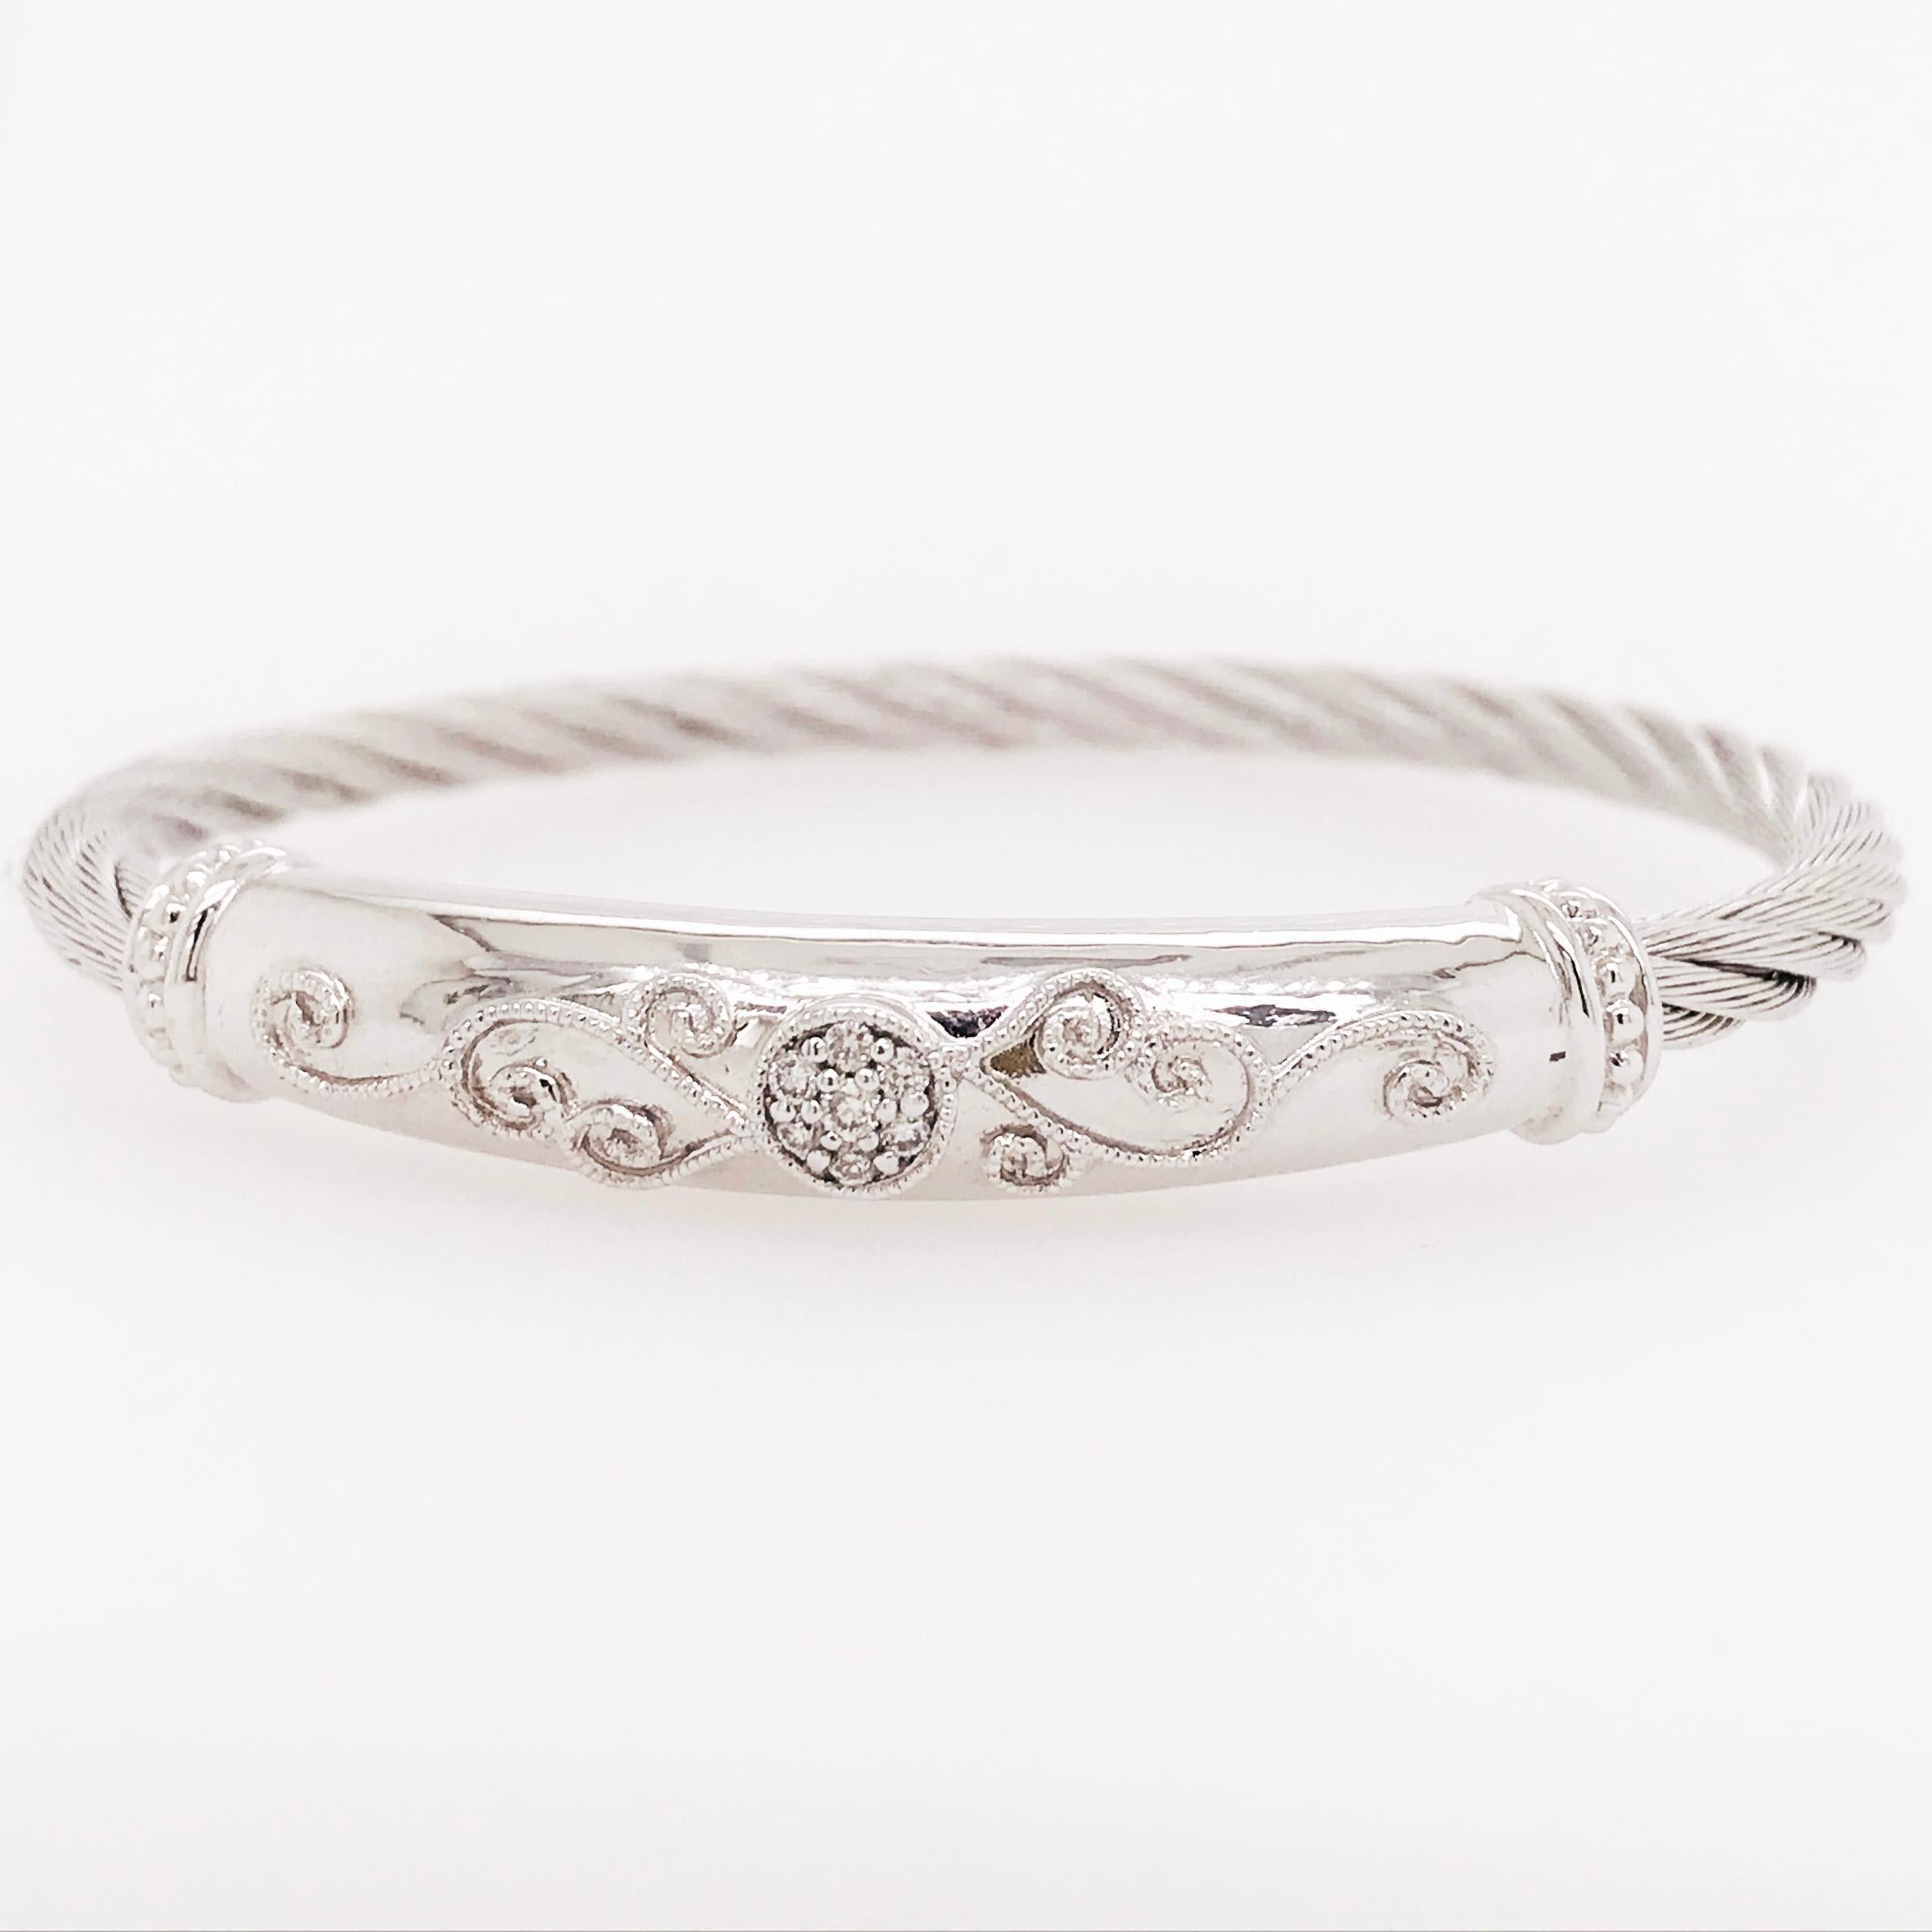 This modern diamond bangle bracelet is a unique, seamless design with natural round brilliant diamonds. The bracelet band is a stainless steel, twisted cable band that is attached to a sterling silver tube with a diamonds design on top. The top has